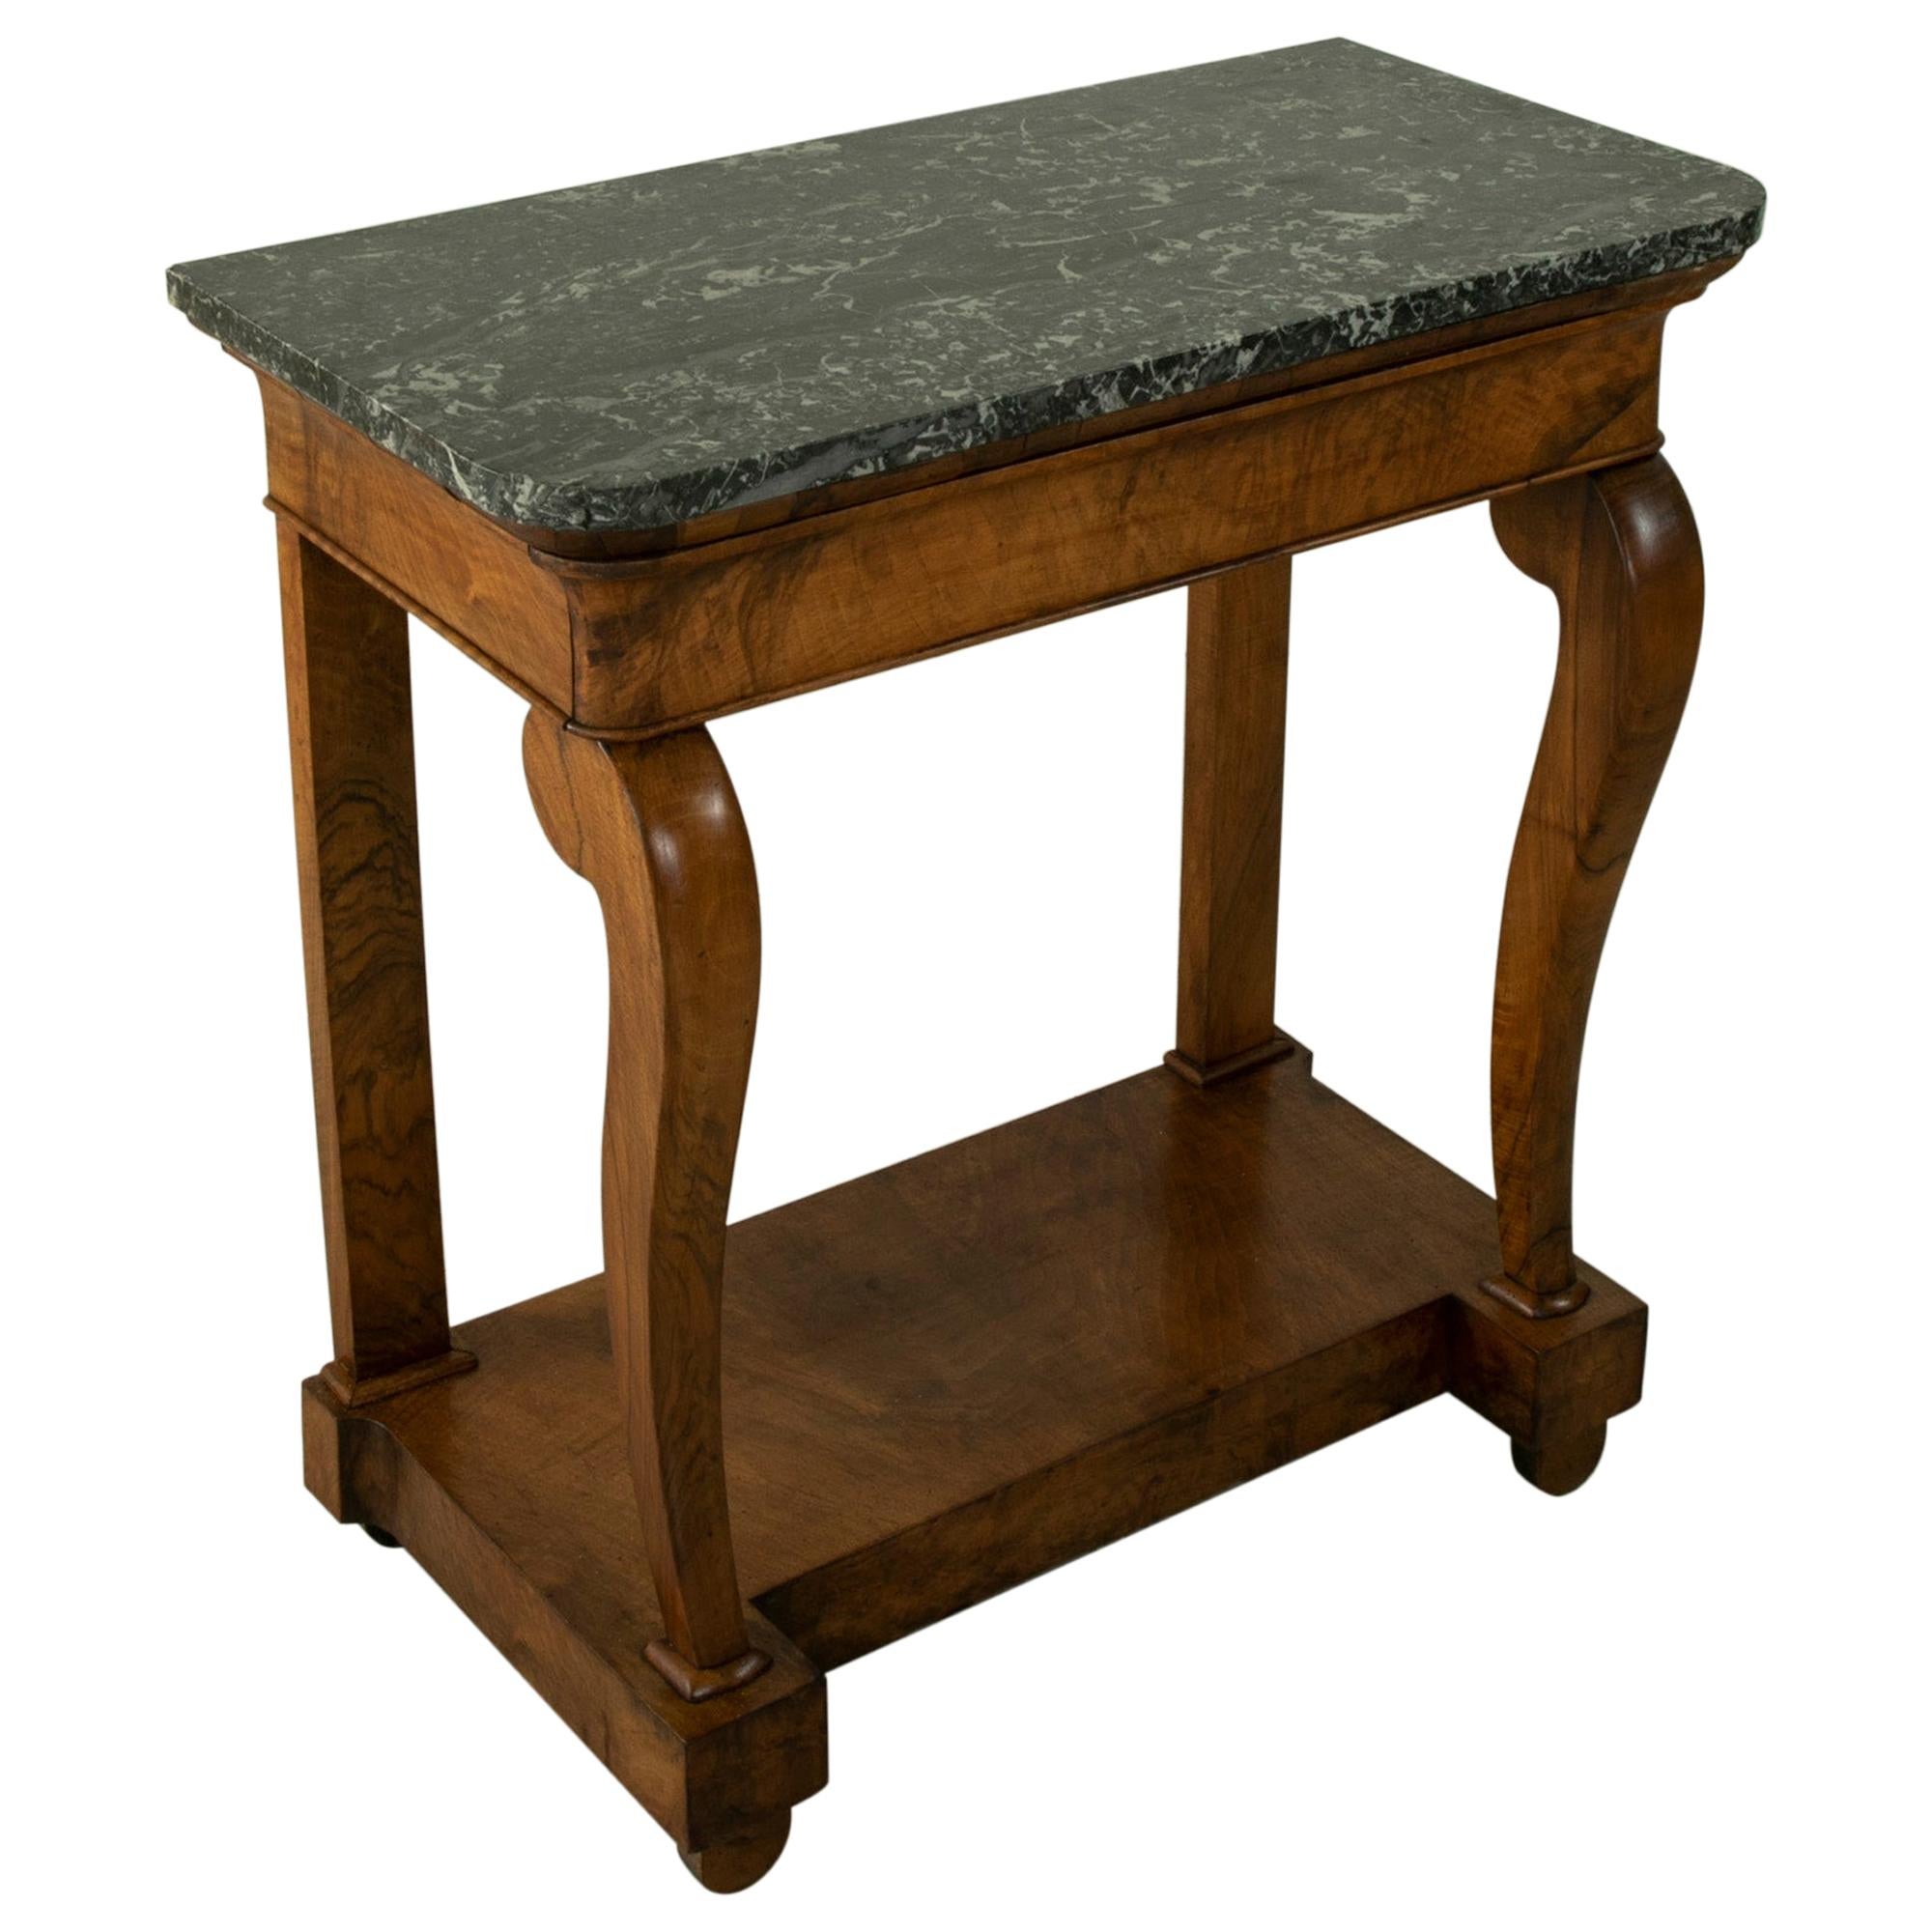 Early 19th Century French Restauration Period Walnut Console Table, Marble Top